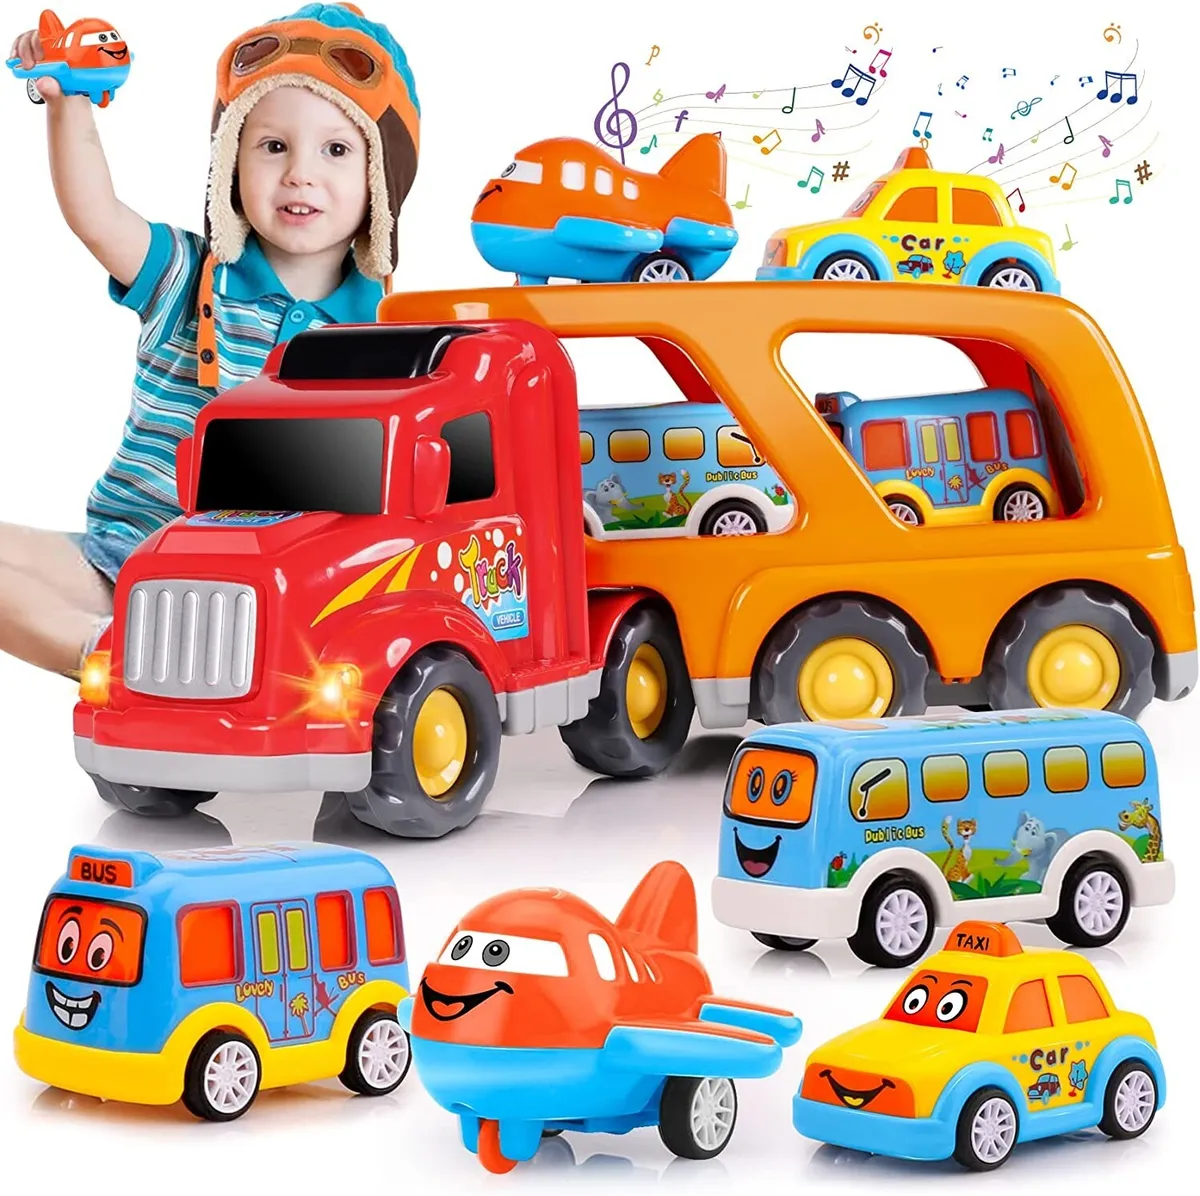 Toddler Toys Car for Boys: Kids Toys for 1 2 3 4 5 Year Old Boys